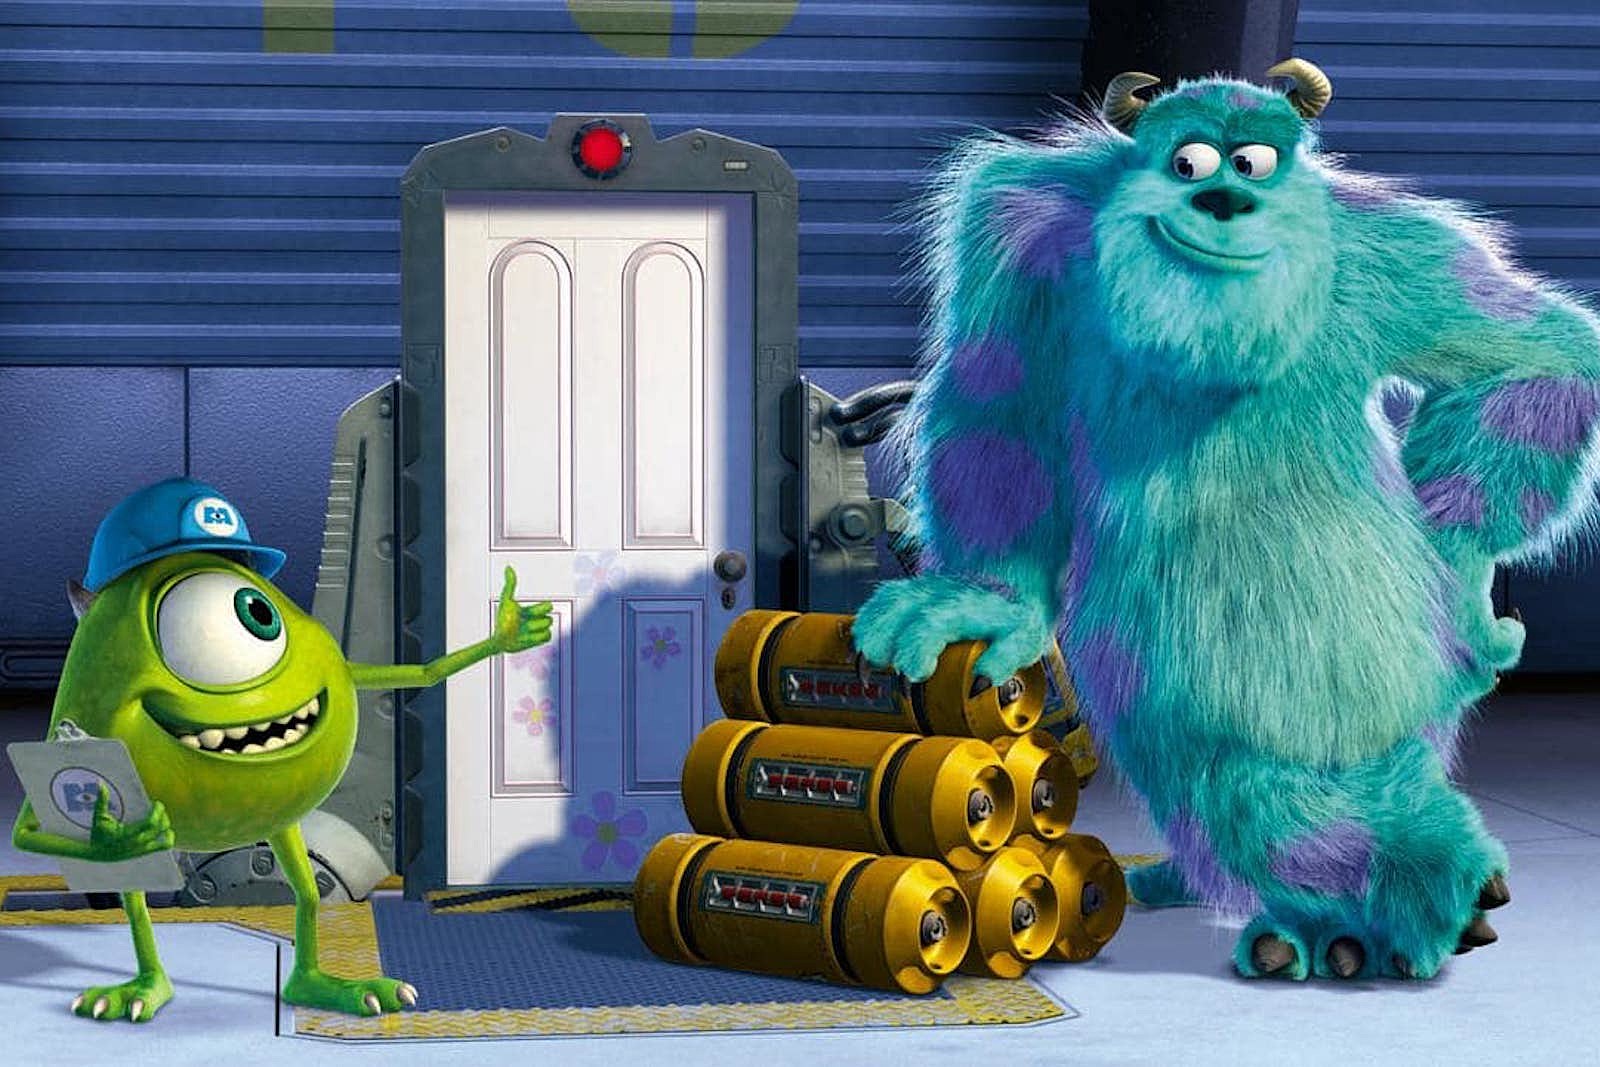 Monsters Inc.' Sequel Series Coming Soon, With Original Cast